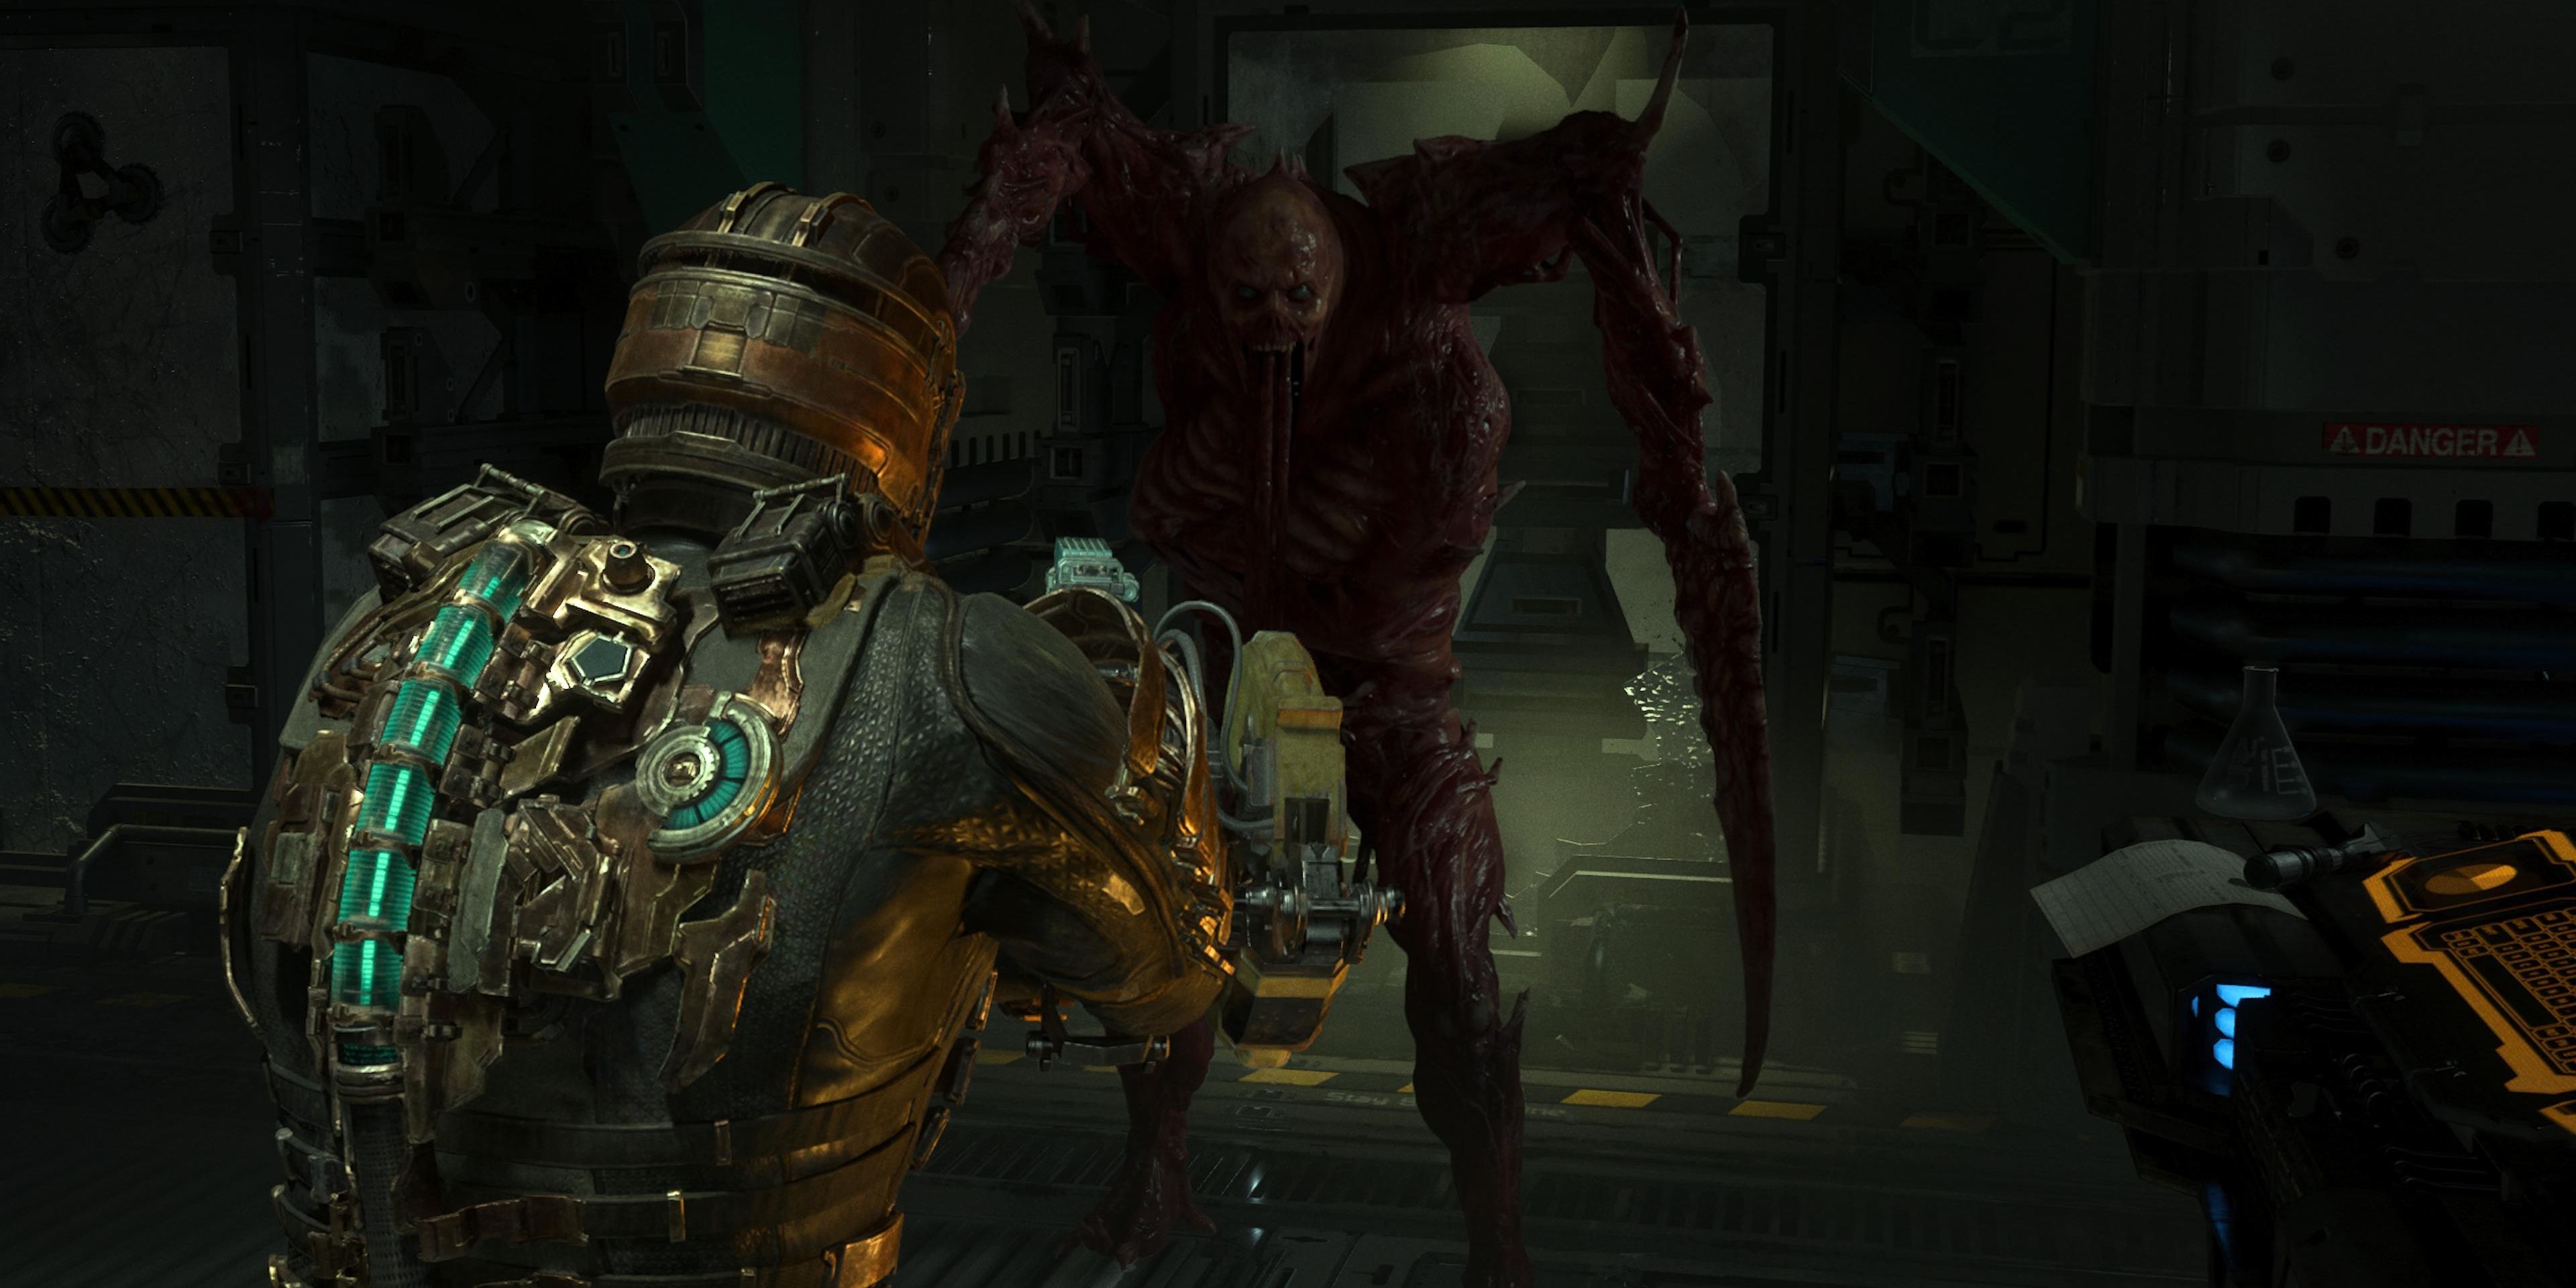 Issac pointing his plasma cutter at the hunter necromorph in Dead Space